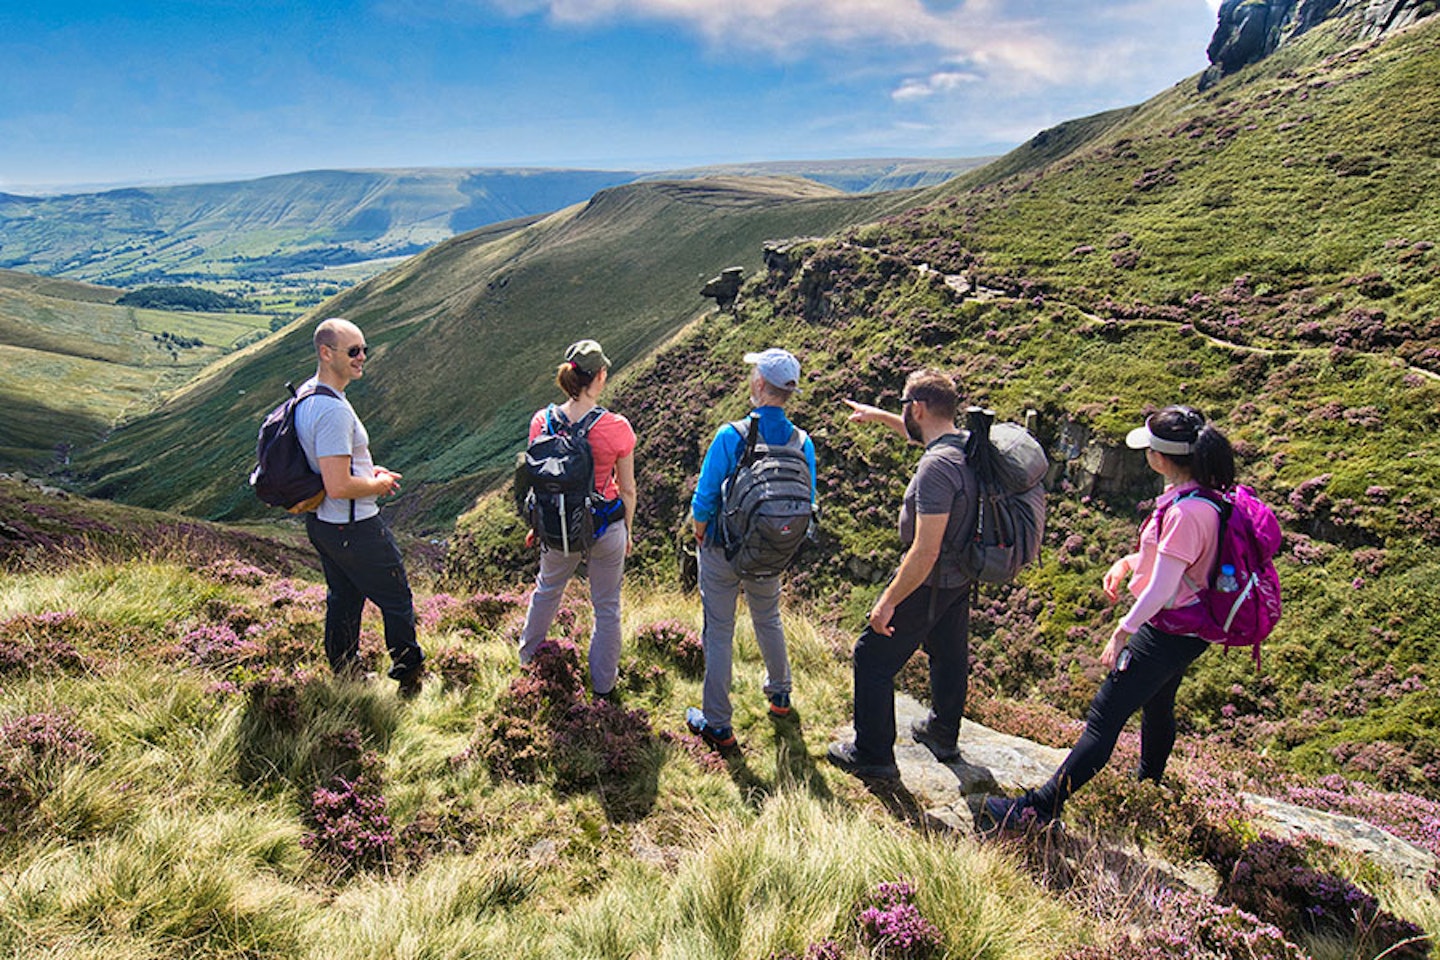 Walkers looking out over a view from Kinder Scout in the Peak District